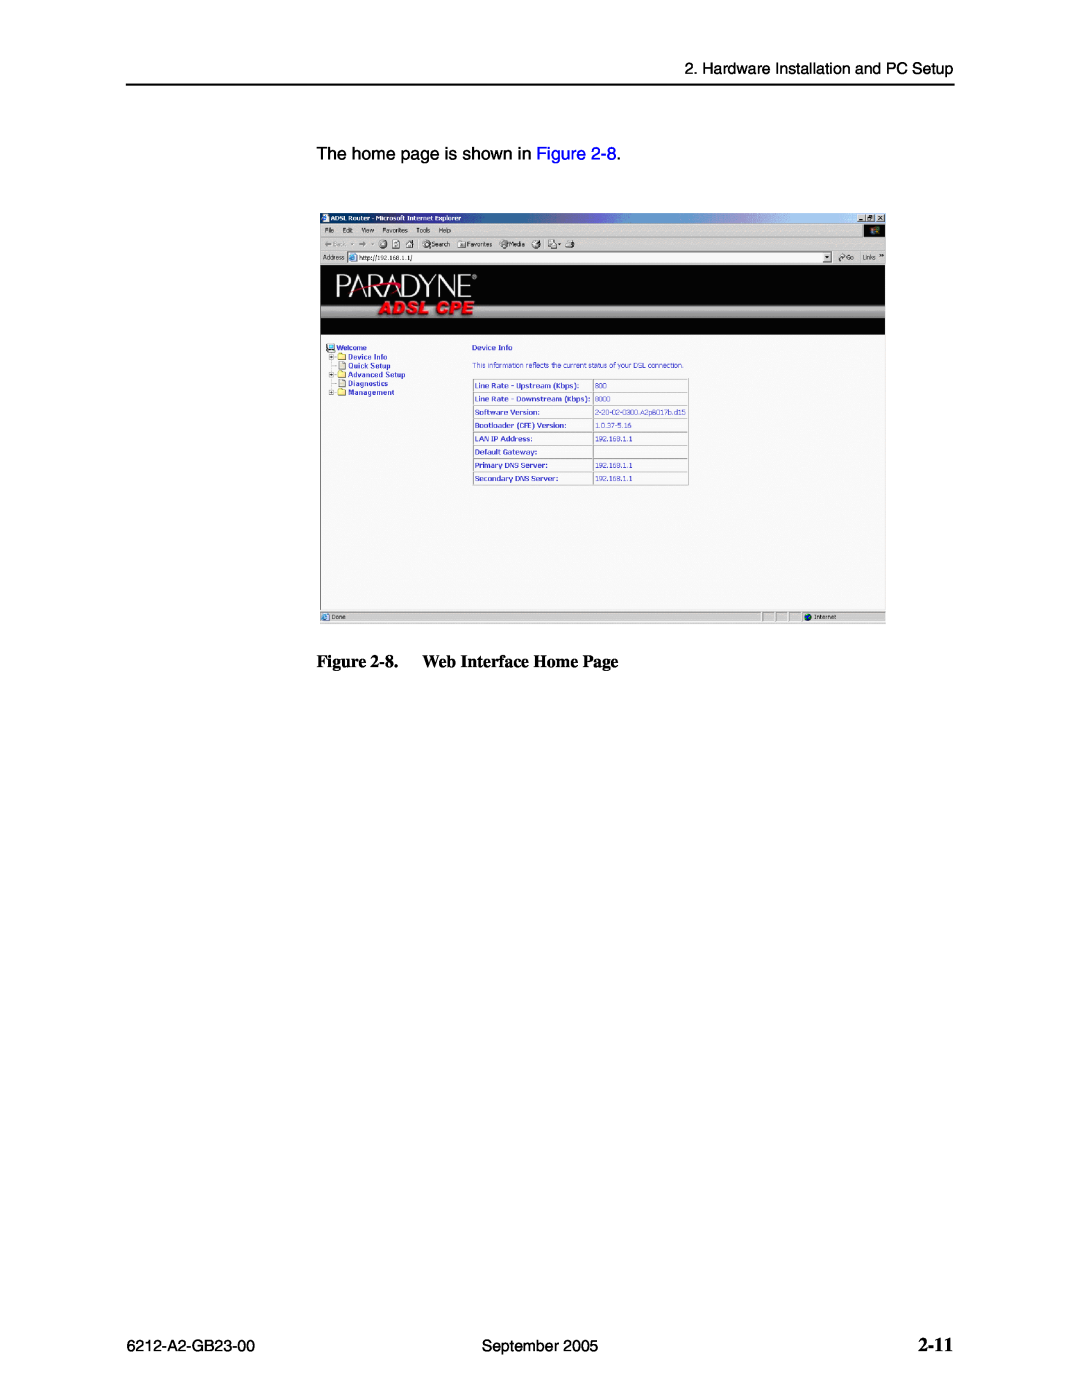 Paradyne 6212-I1 manual 2-11, 8. Web Interface Home Page, The home page is shown in Figure 